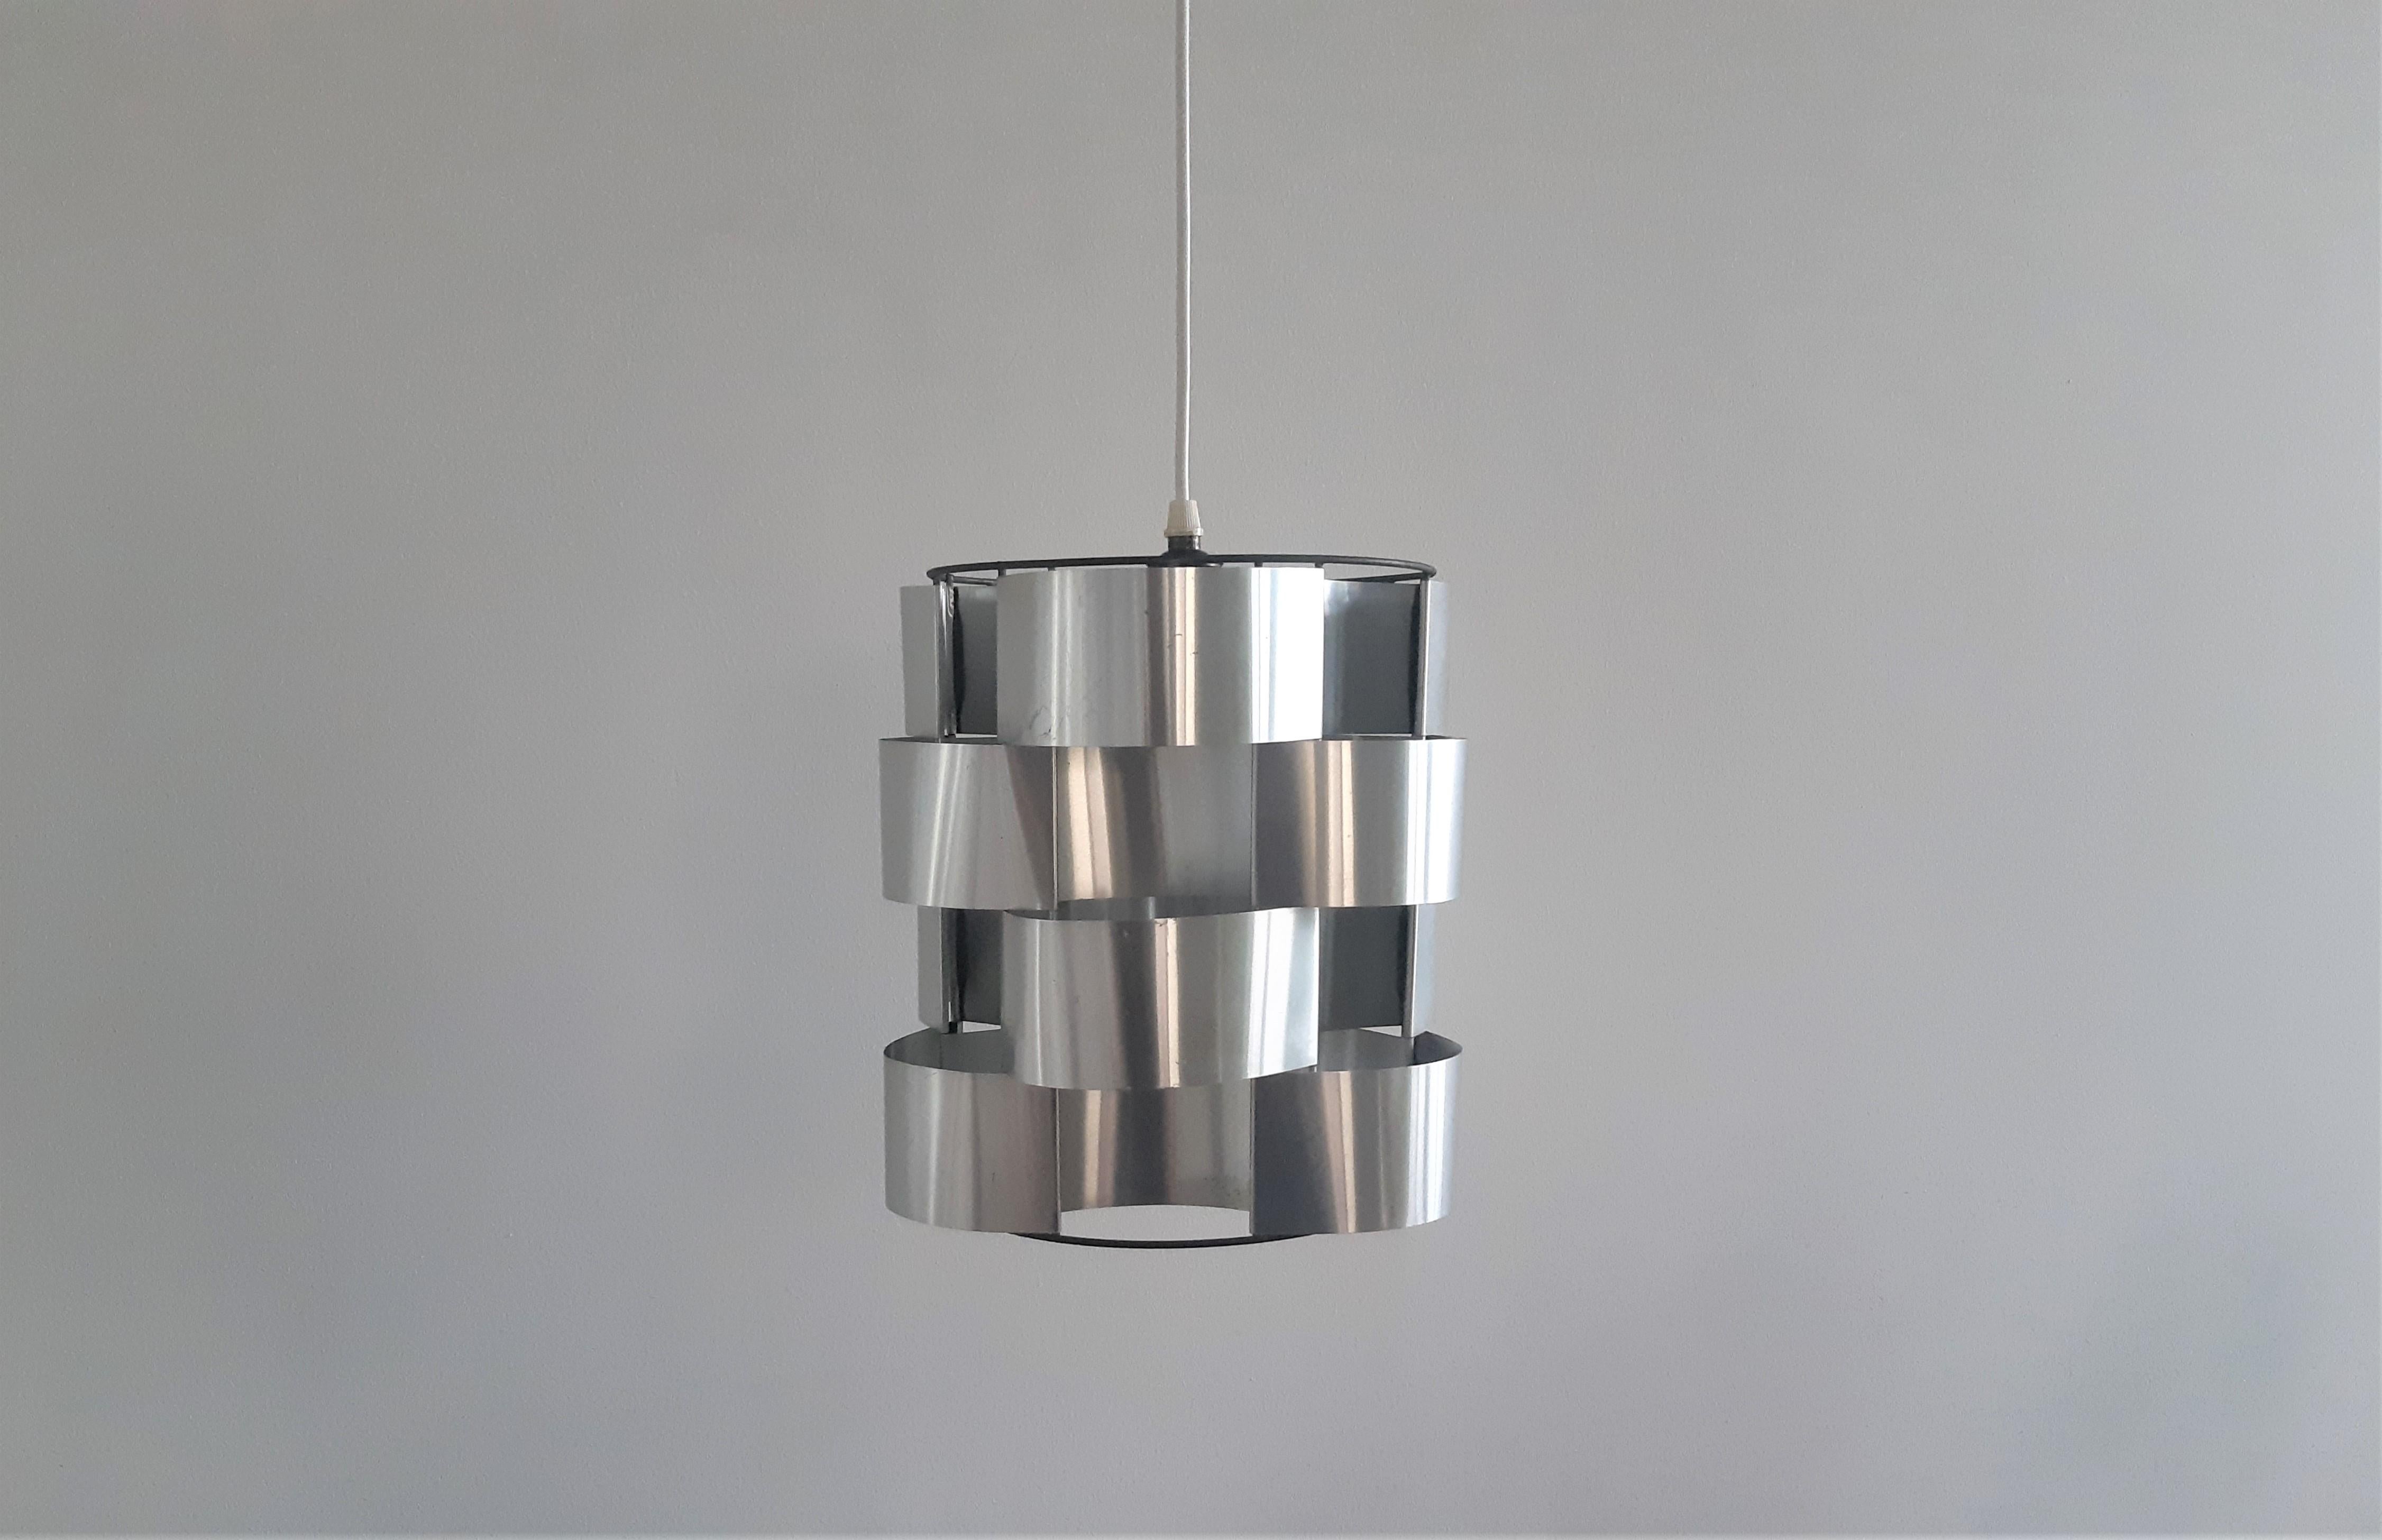 This pendant lamp was designed by Max Sauze in the 1970's in France. It has a metal frame with curved and folded aluminum slats. This lamp has a touch of Space Age style and the shape and its material create a stunning effect when lit. It is in a